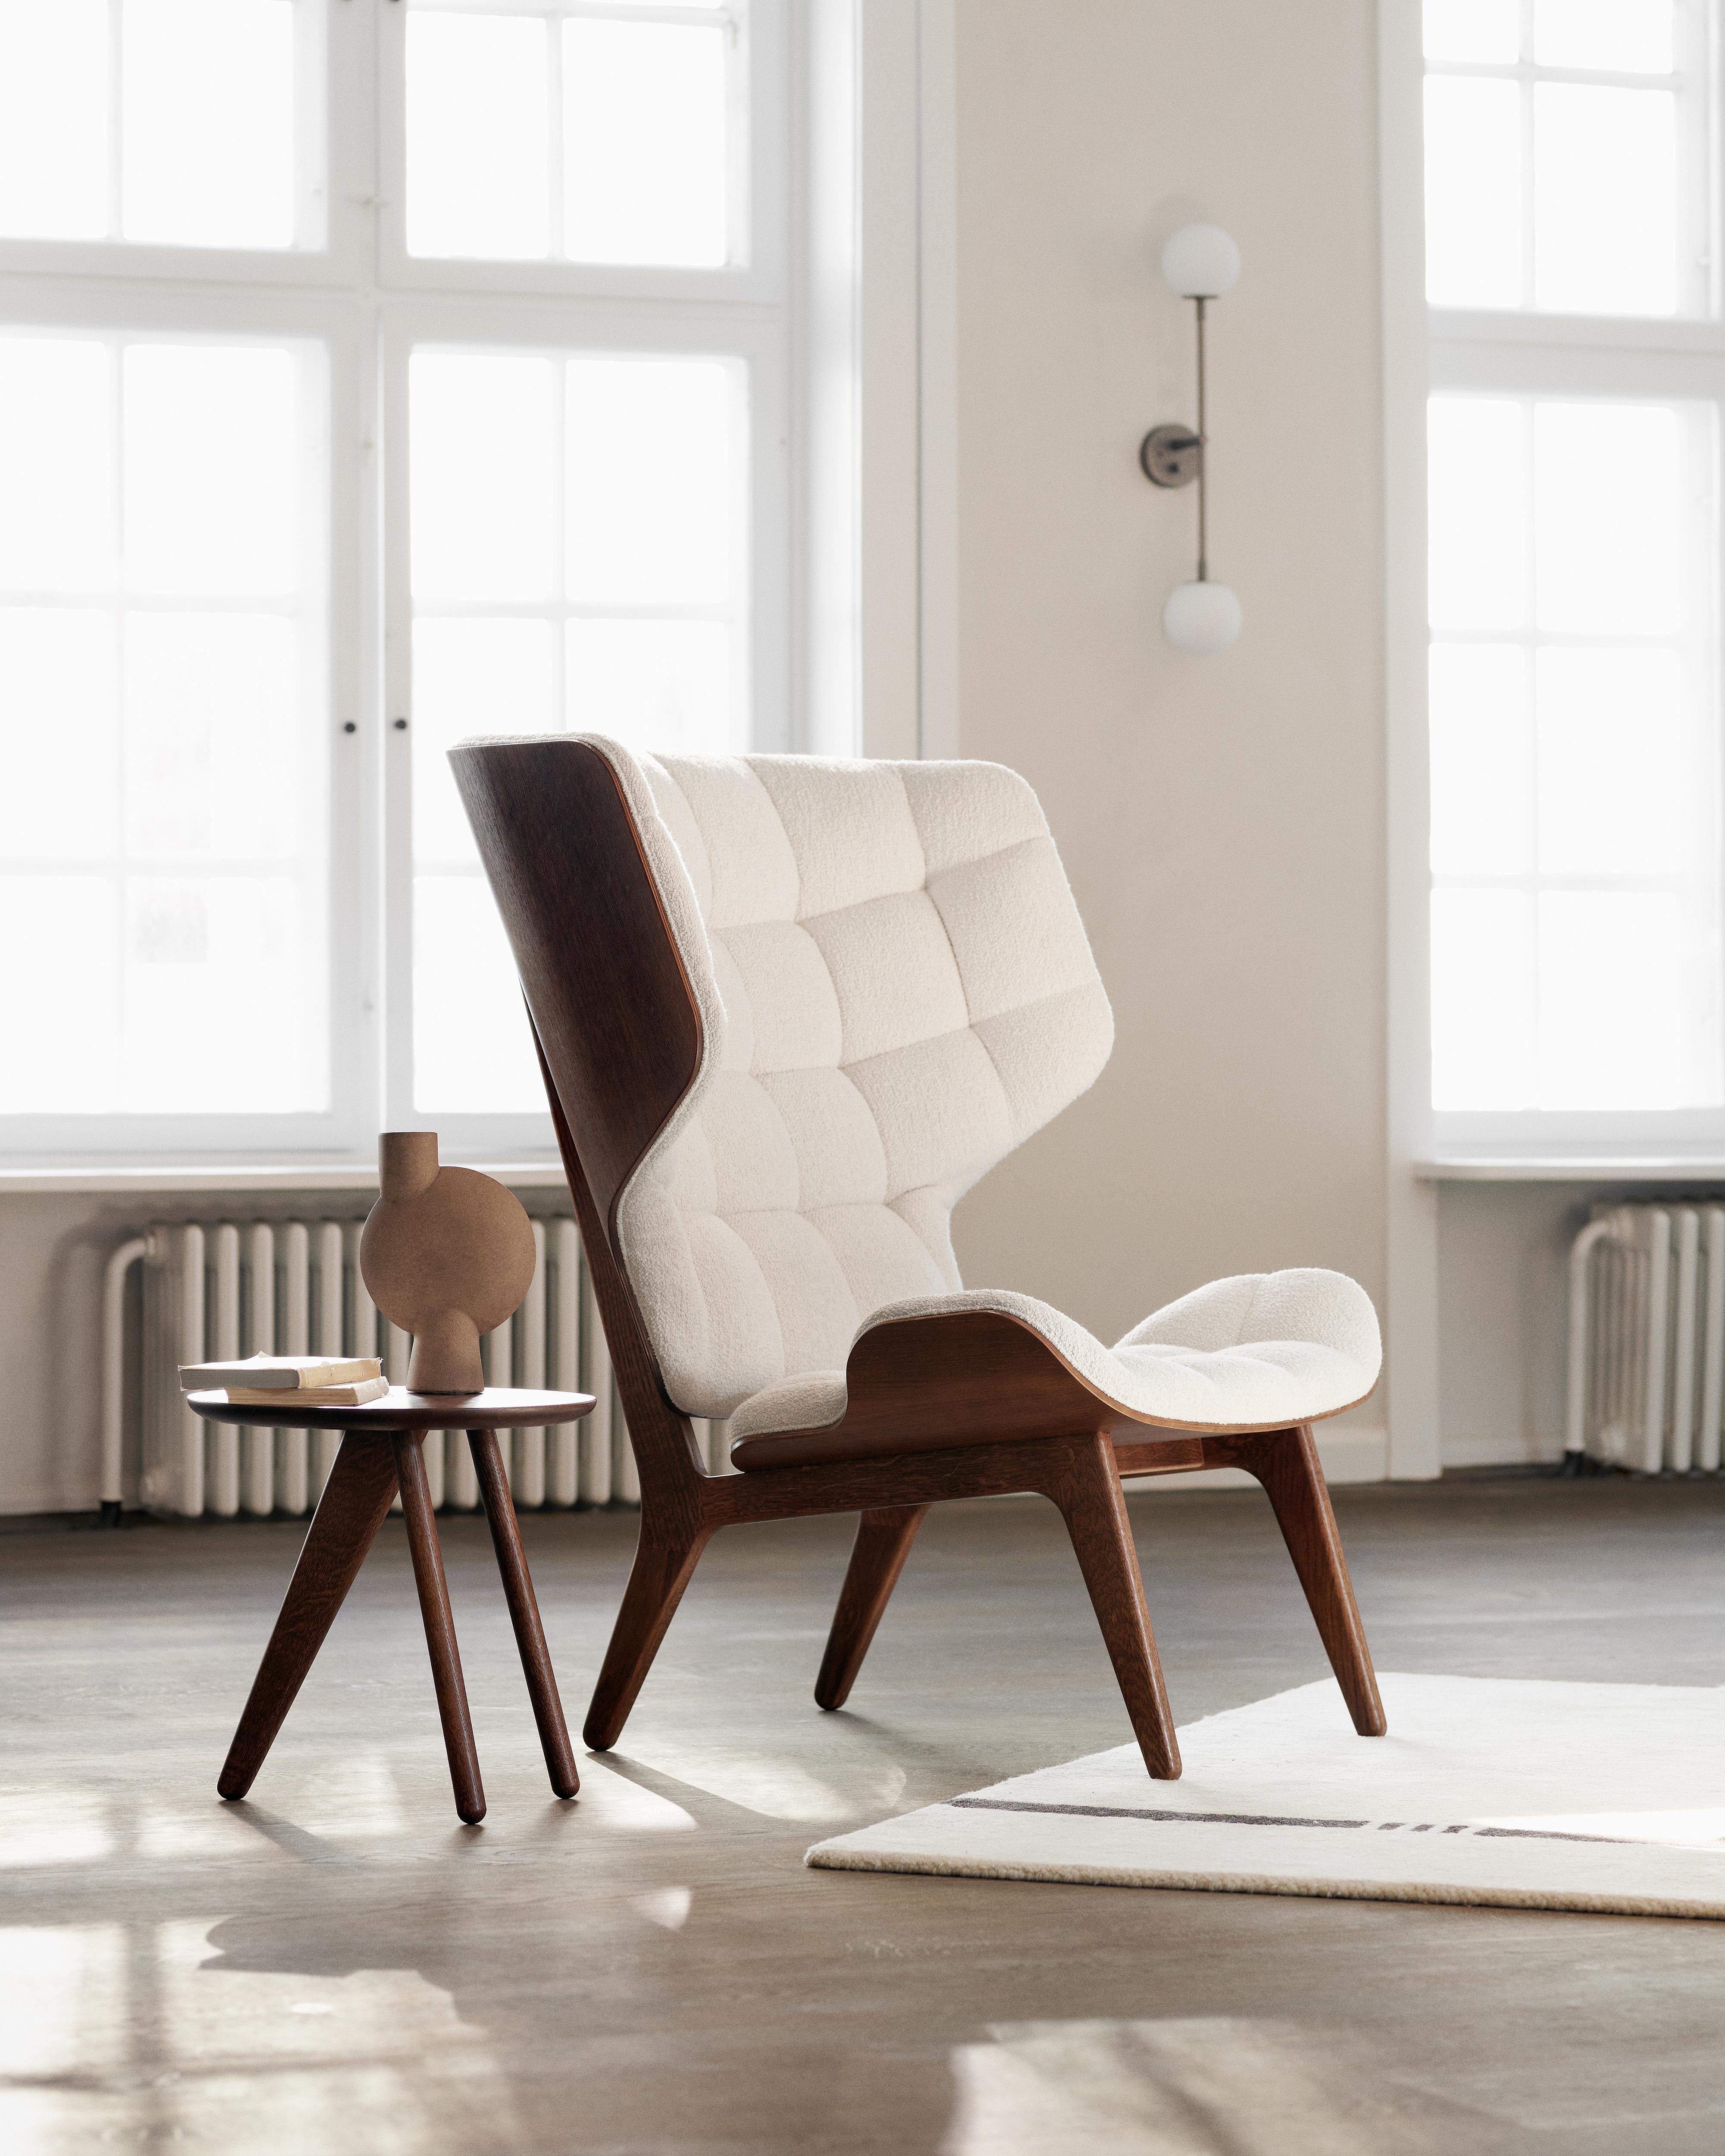 Mammoth chair + ottoman
Signed by Rune Krøjgaard & Knut Bendik Humlevik for Norr11. 

Dimensions:
- Chair: W 89 cm / D 87 cm / H 104 cm / SH 35,5 cm
- Ottoman: W 61,5 cm / D 53 cm / H 37 cm

Models shown on the picture:
Wood: Light Smoked